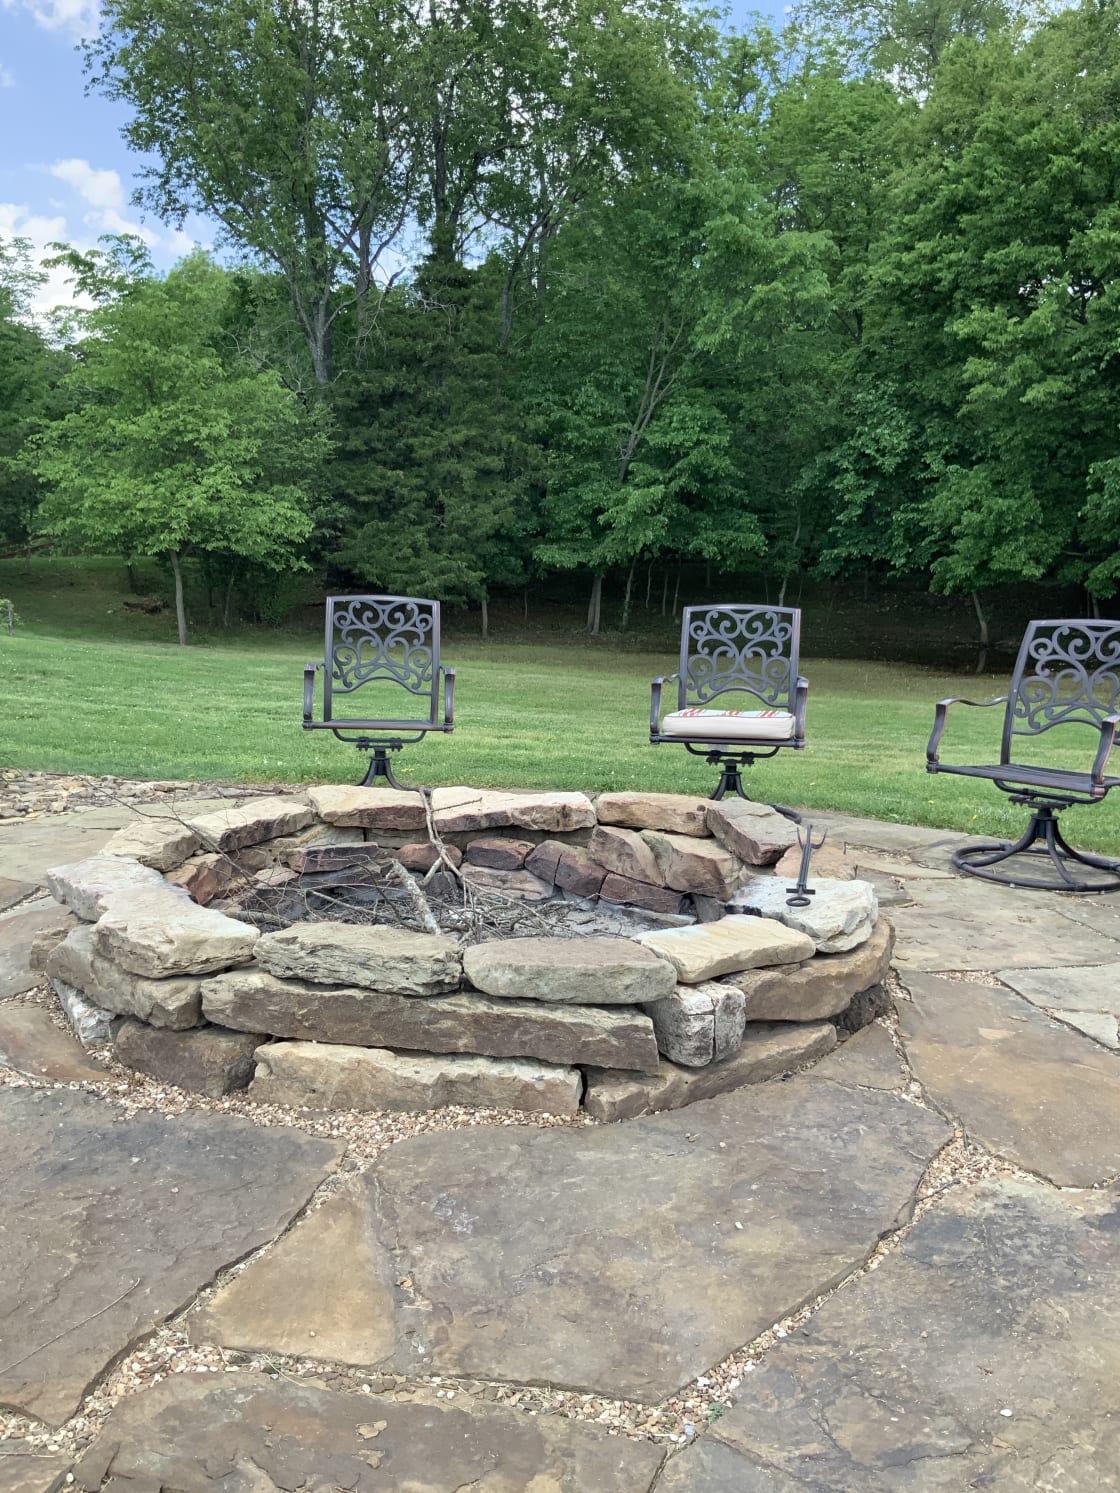 Fire pit when conditions are not dry